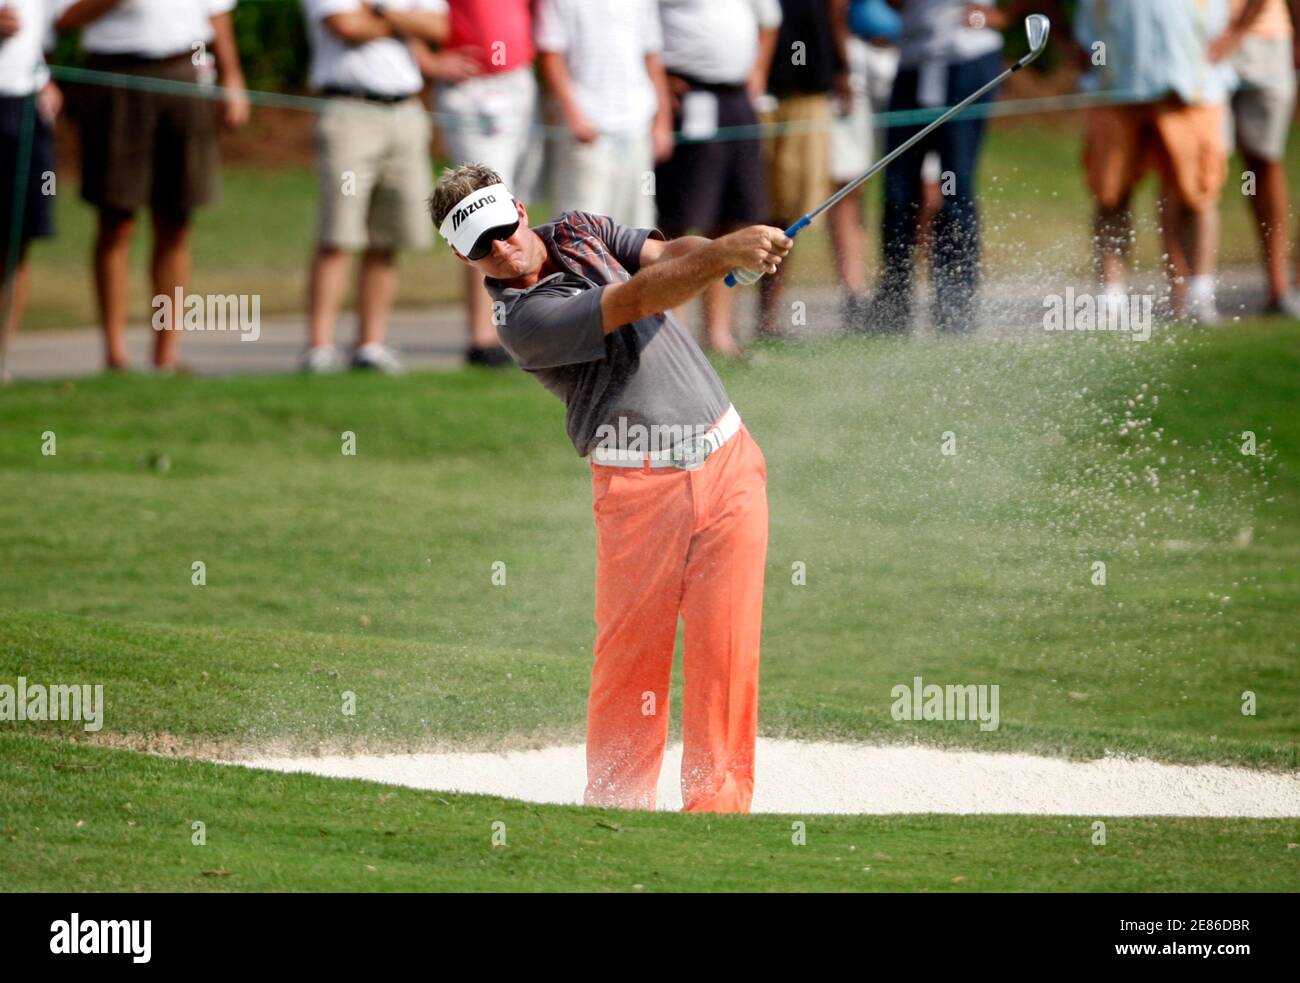 Brian Gay of the U.S. plays his second shot from the fairway bunker on the eighteenth hole during the third round of the St. Jude Classic golf tournament at TPC Southwind in Memphis, Tennessee June 13, 2009.   REUTERS/Nikki Boertman    (UNITED STATES SPORT GOLF) Stock Photo